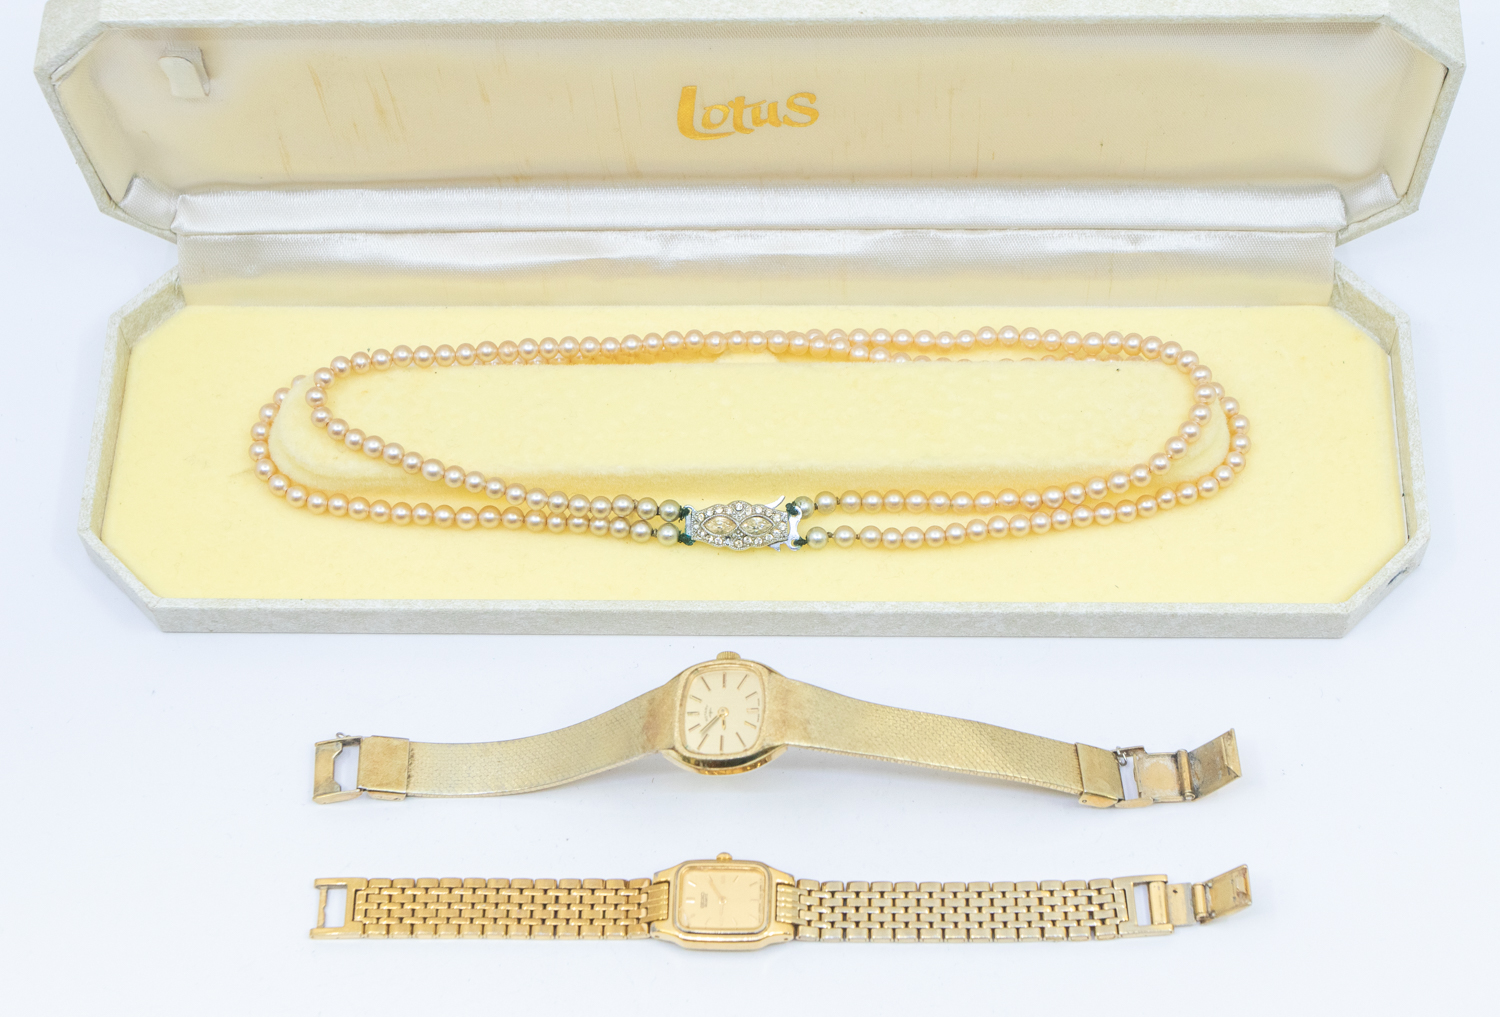 Two gold plated ladies wristwatches including Seiko (damaged broken glass) and Rotary, together with